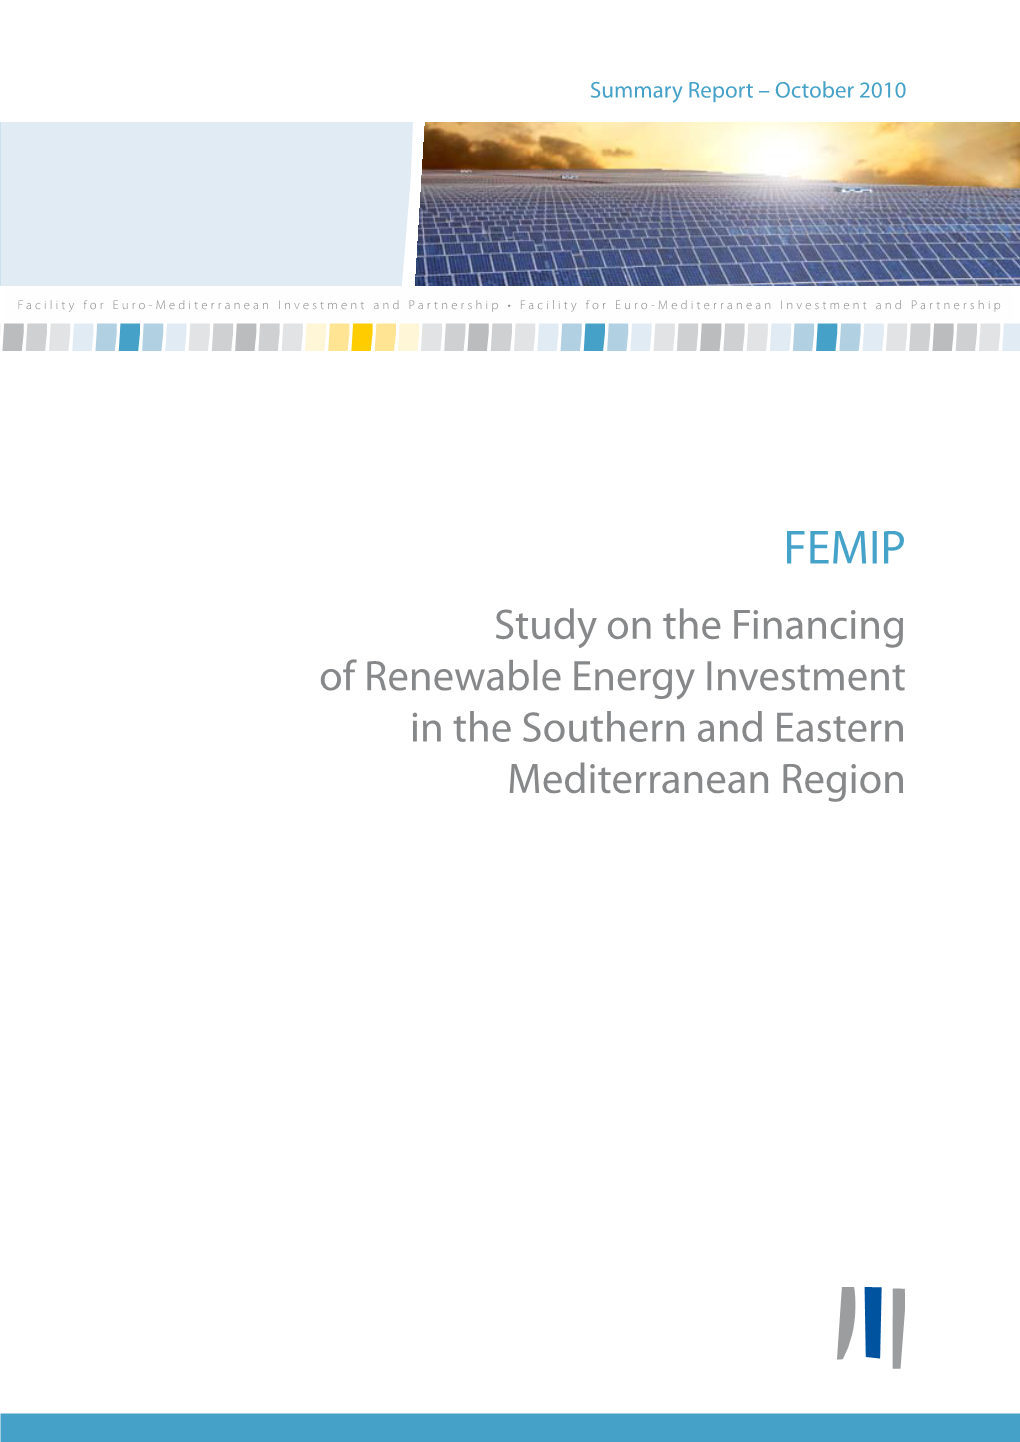 Study on the Financing of Renewable Energy Investment in the Southern and Eastern Mediterranean Region